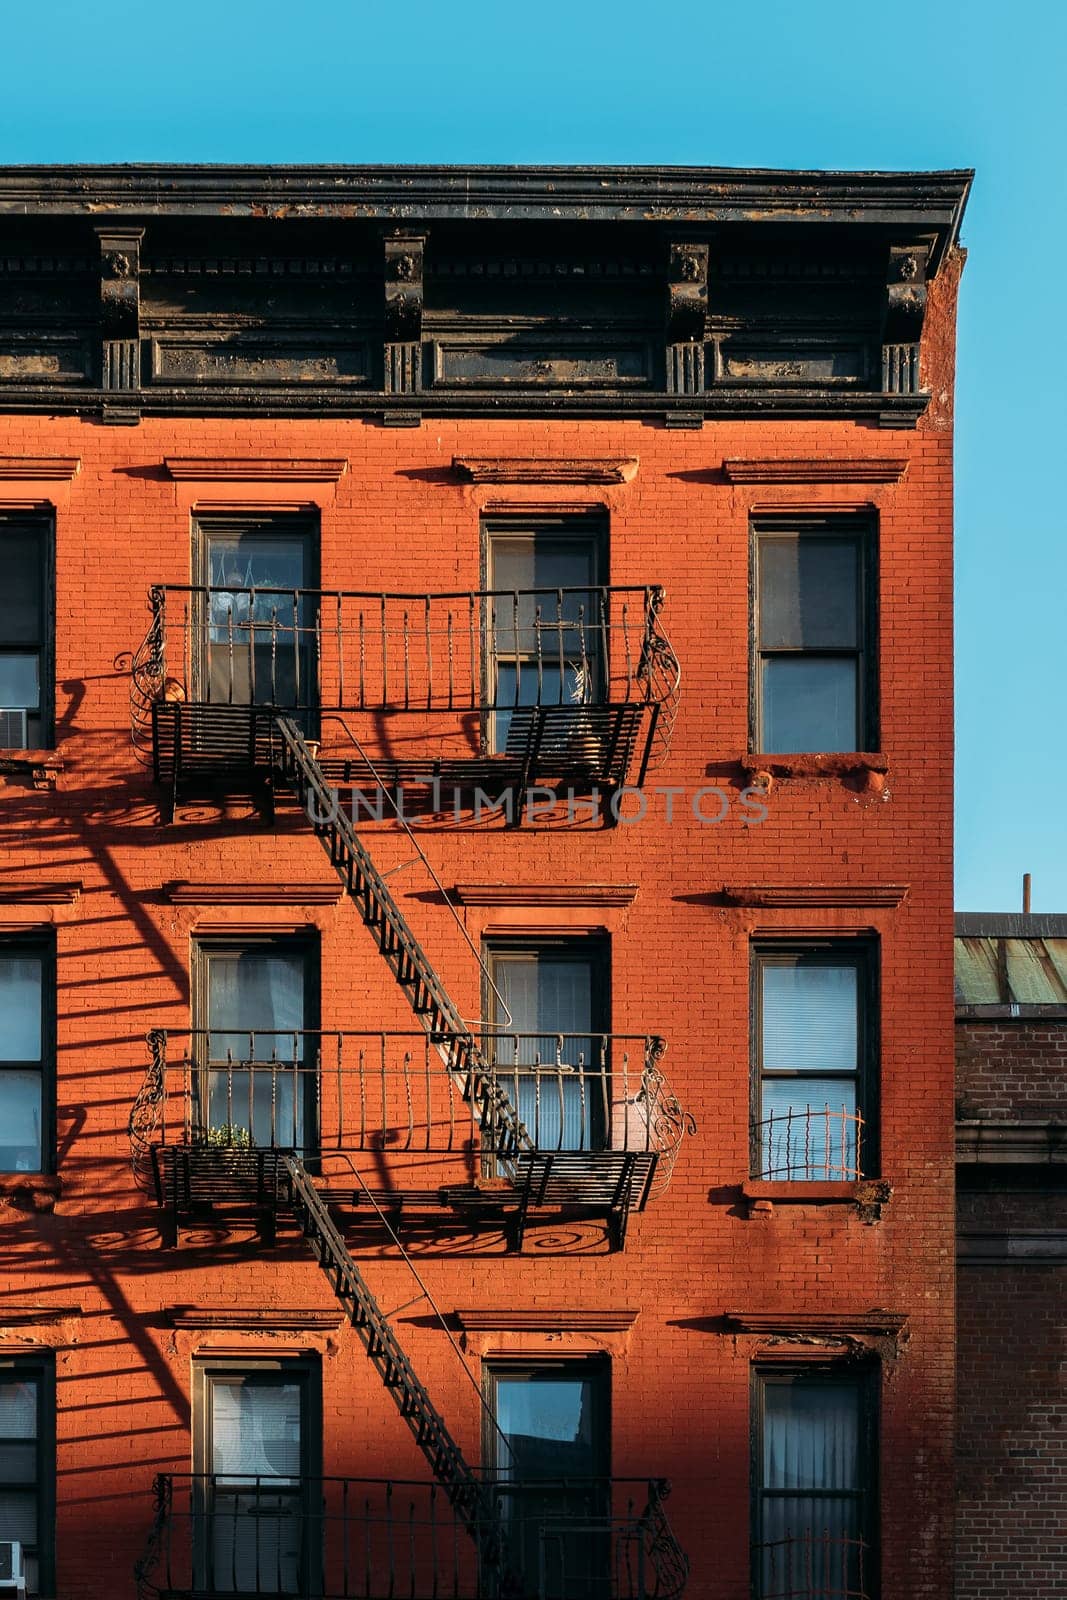 Morning Sunlight on Red Brick Building with Iron Fire Escapes in NYC by apavlin